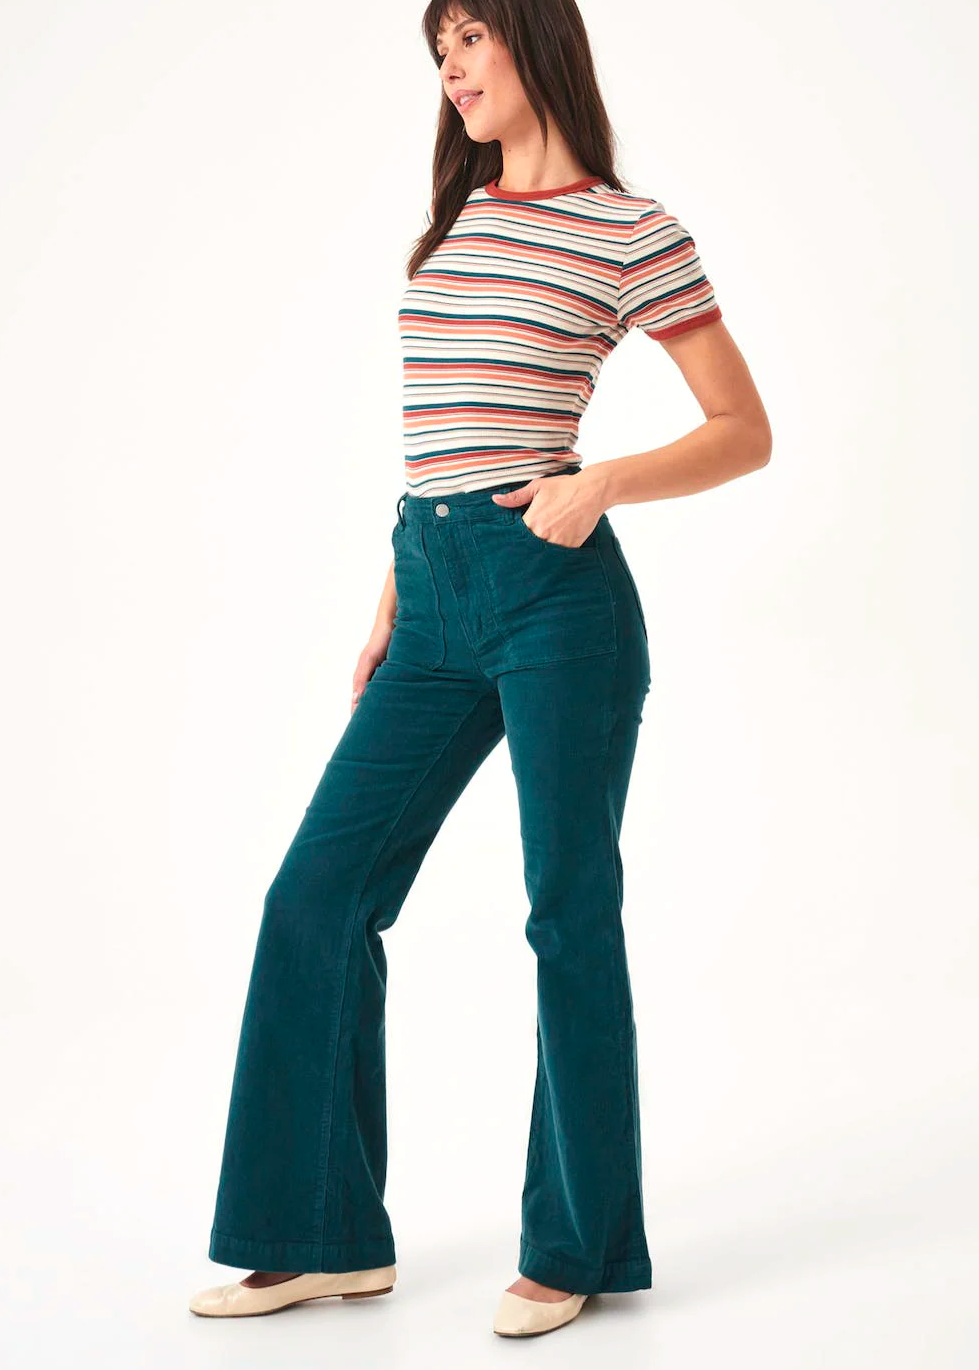 70s inspired Forest Green Teal Blue Corduroy Eastcoast Flares with high rise waist by Rolla's Jeans